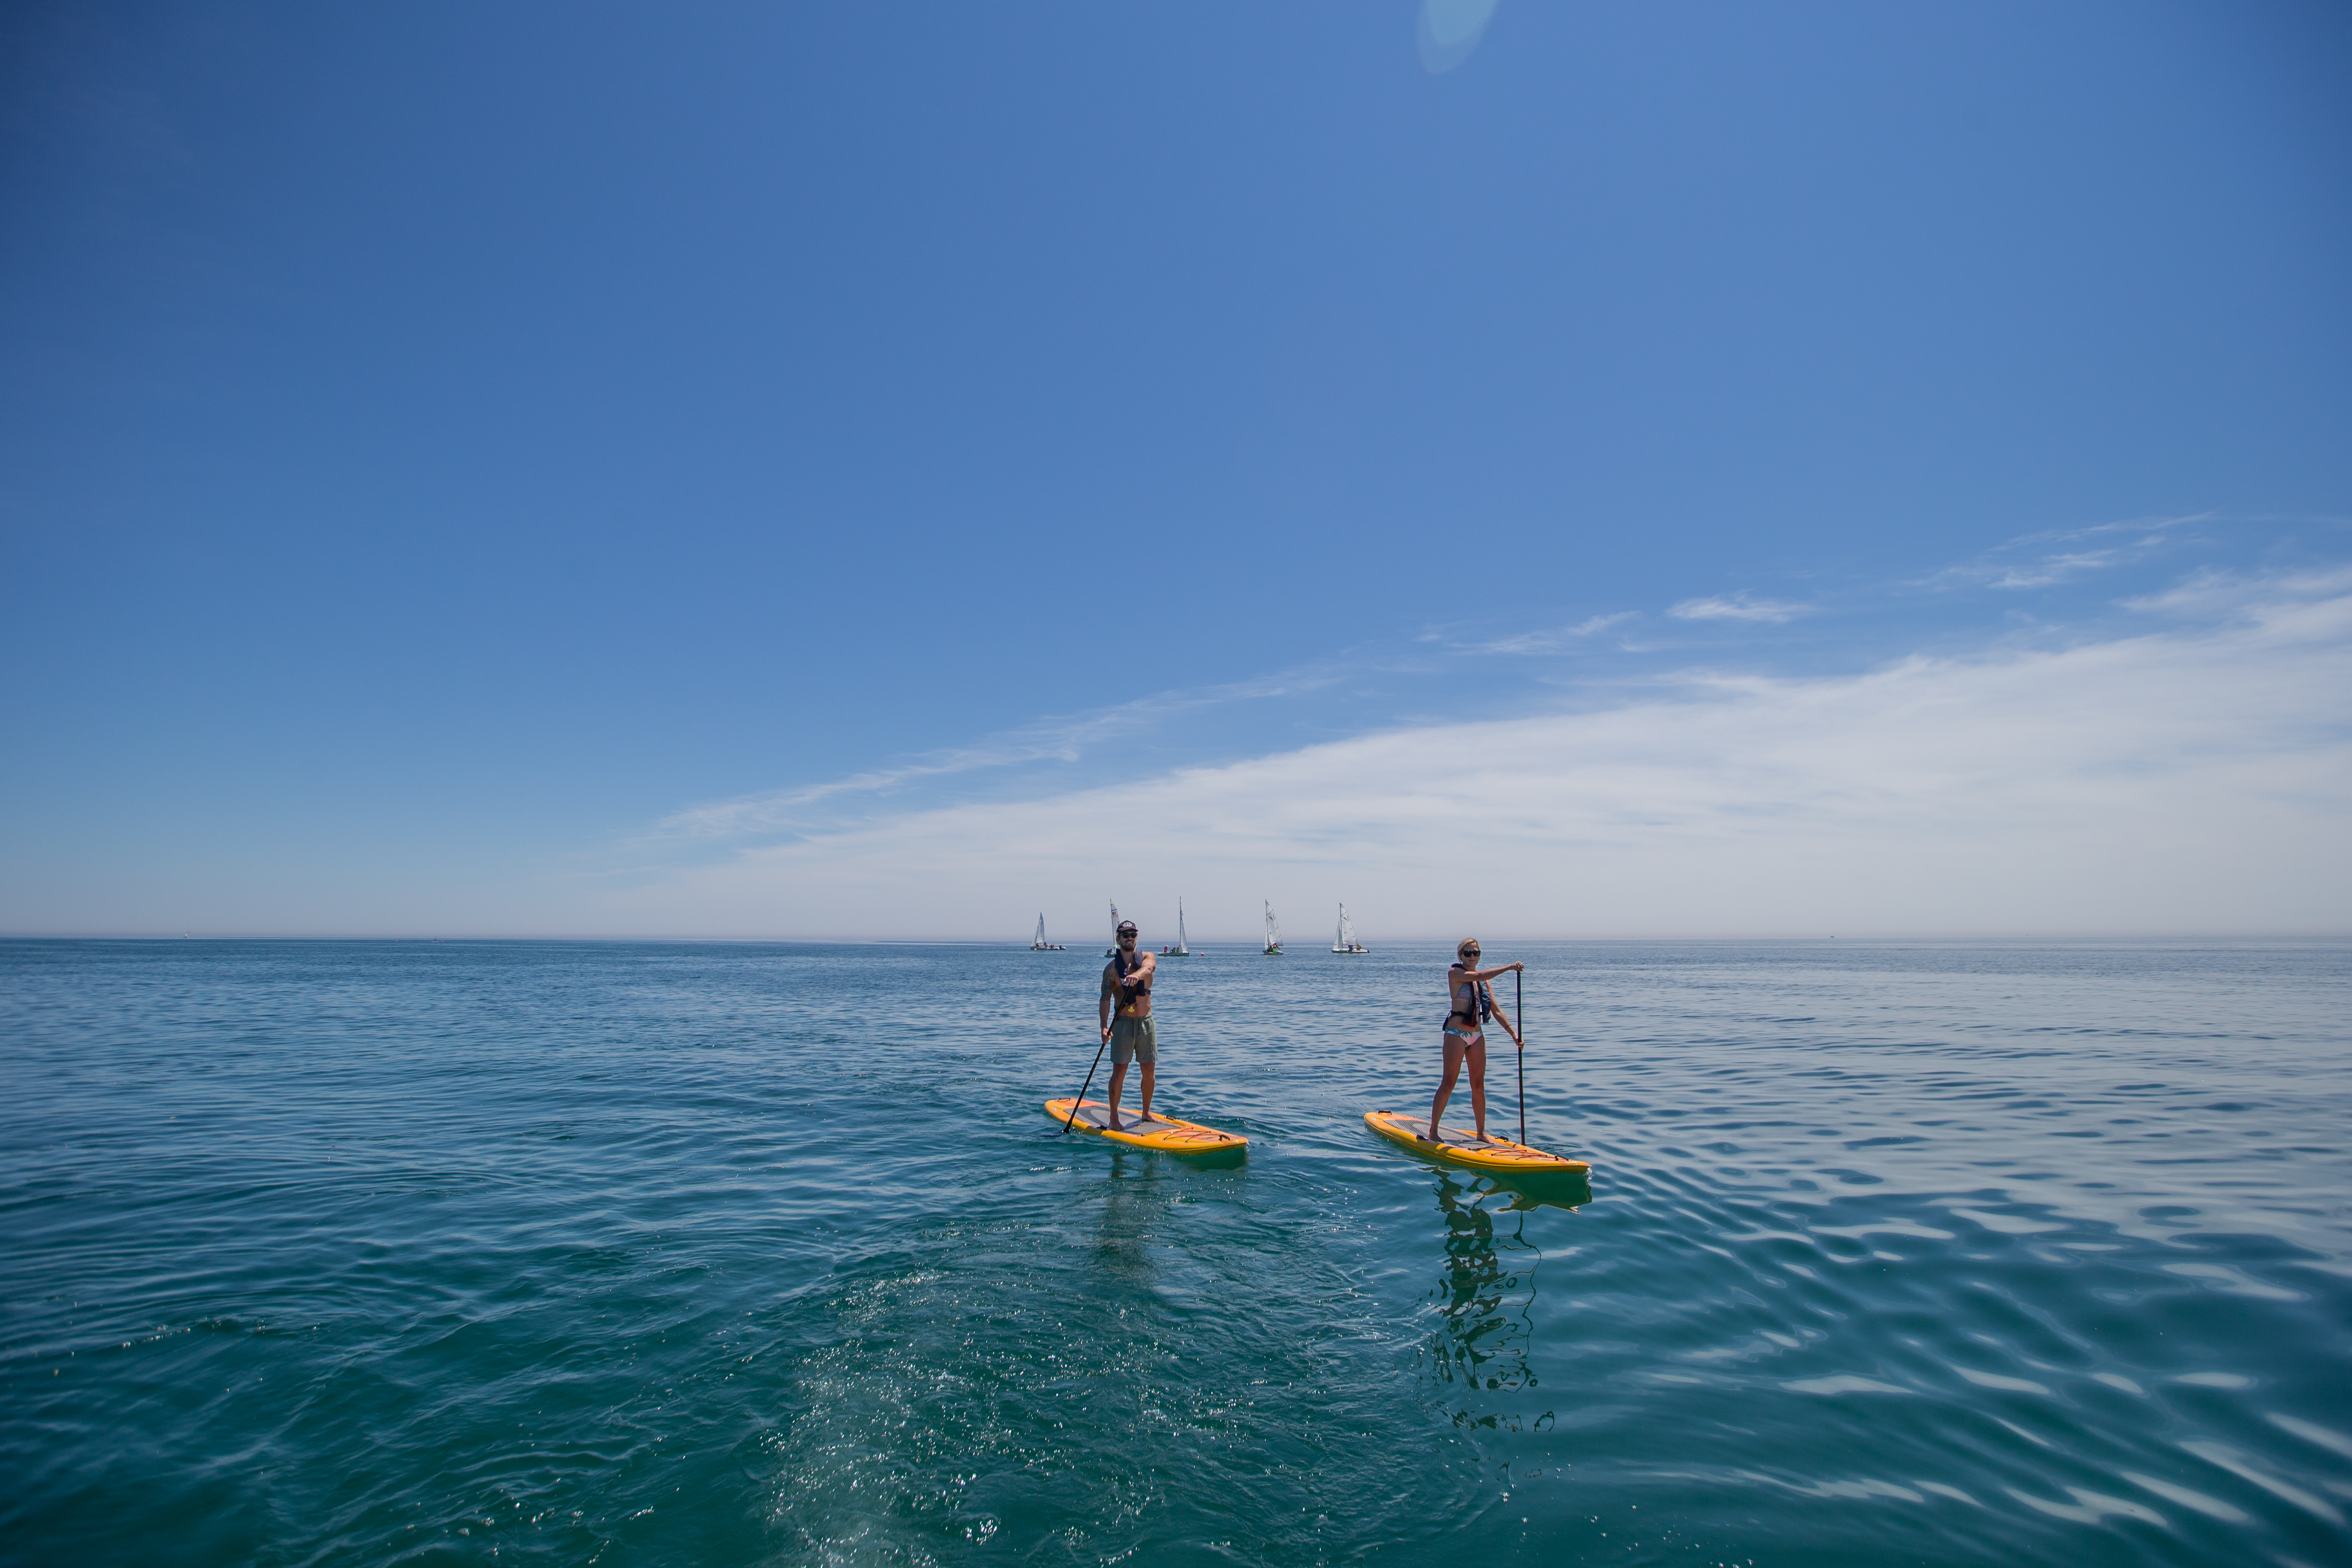 Image of two people on stand up paddle boards on a lake